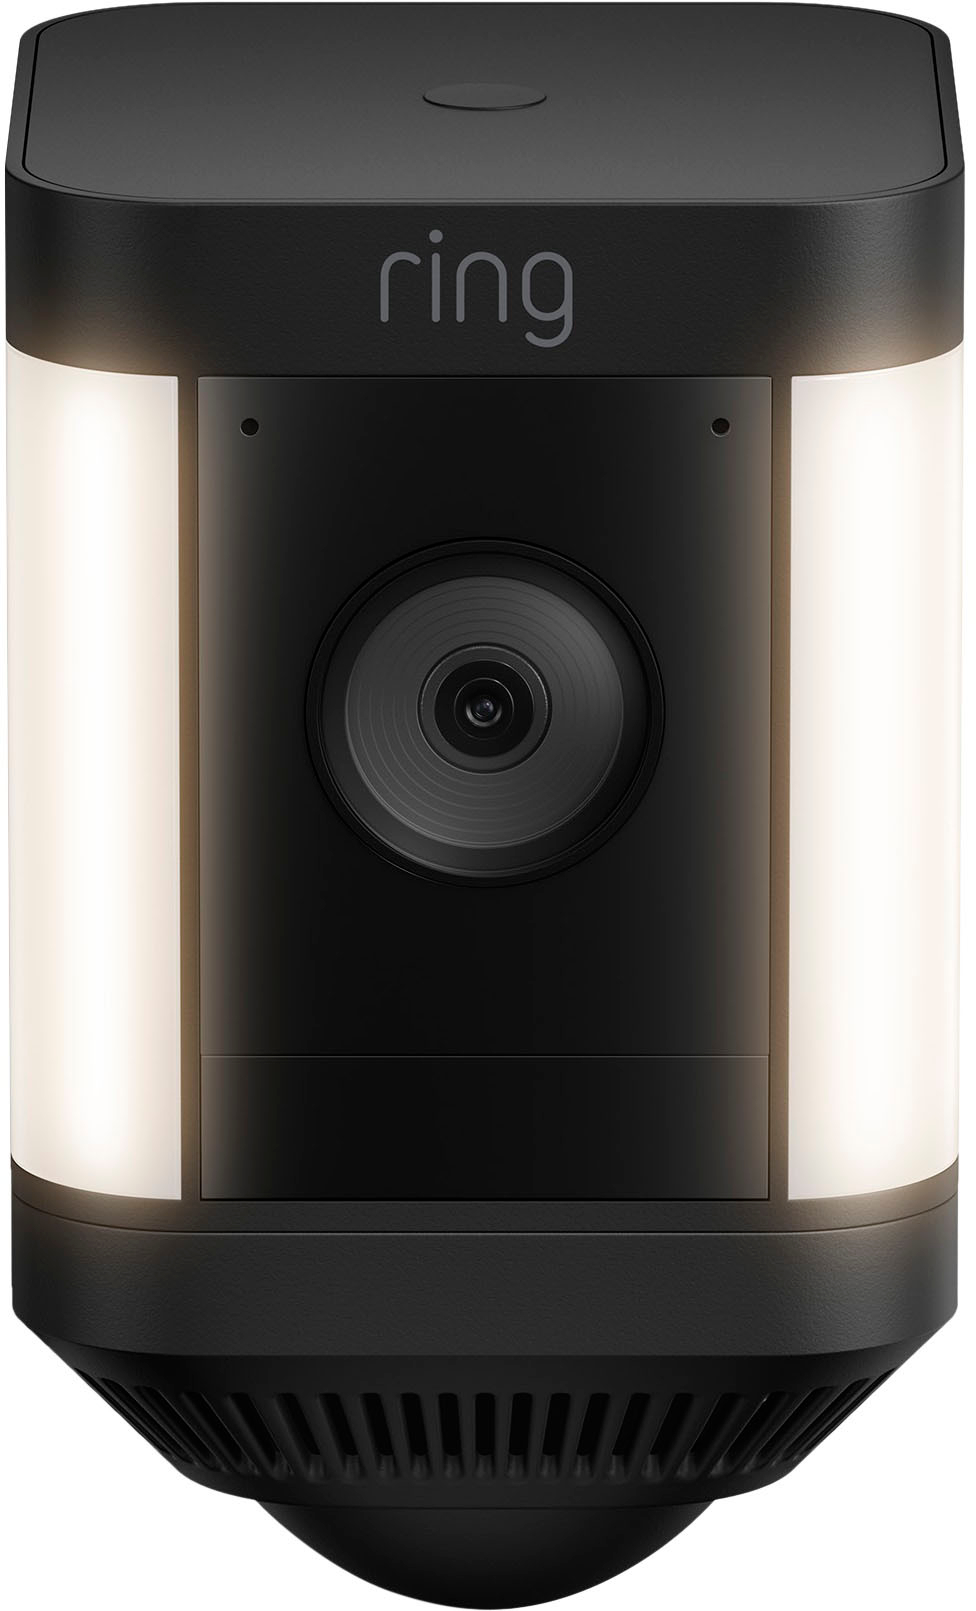 s New Ring Spotlight Camera Gets 3D Motion Detection. But